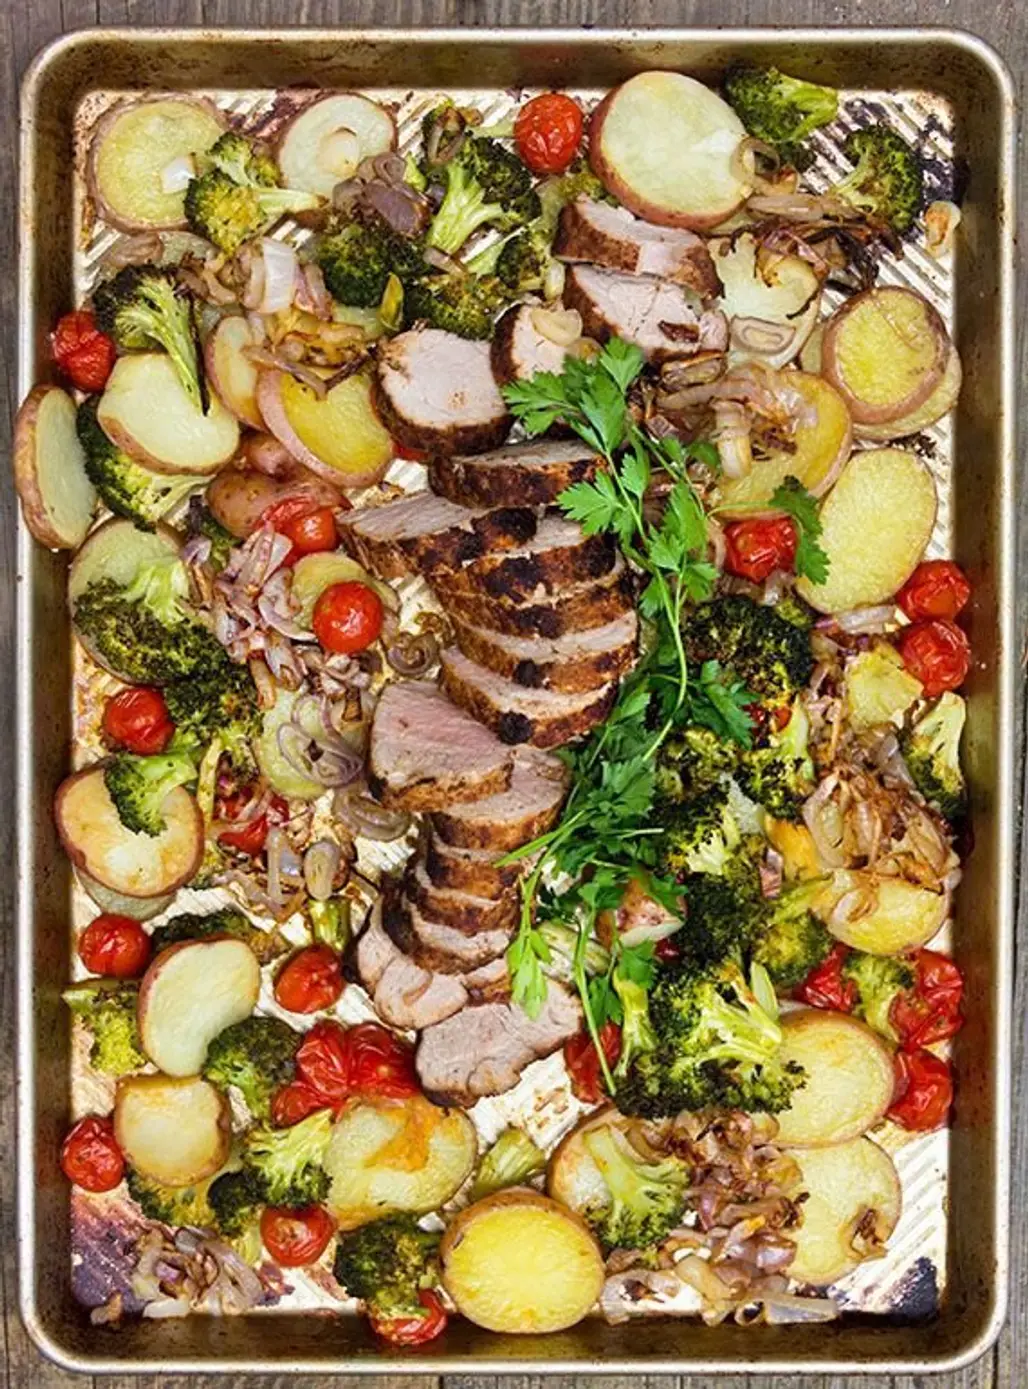 Spice Crusted Pork Potatoes and Vegetables